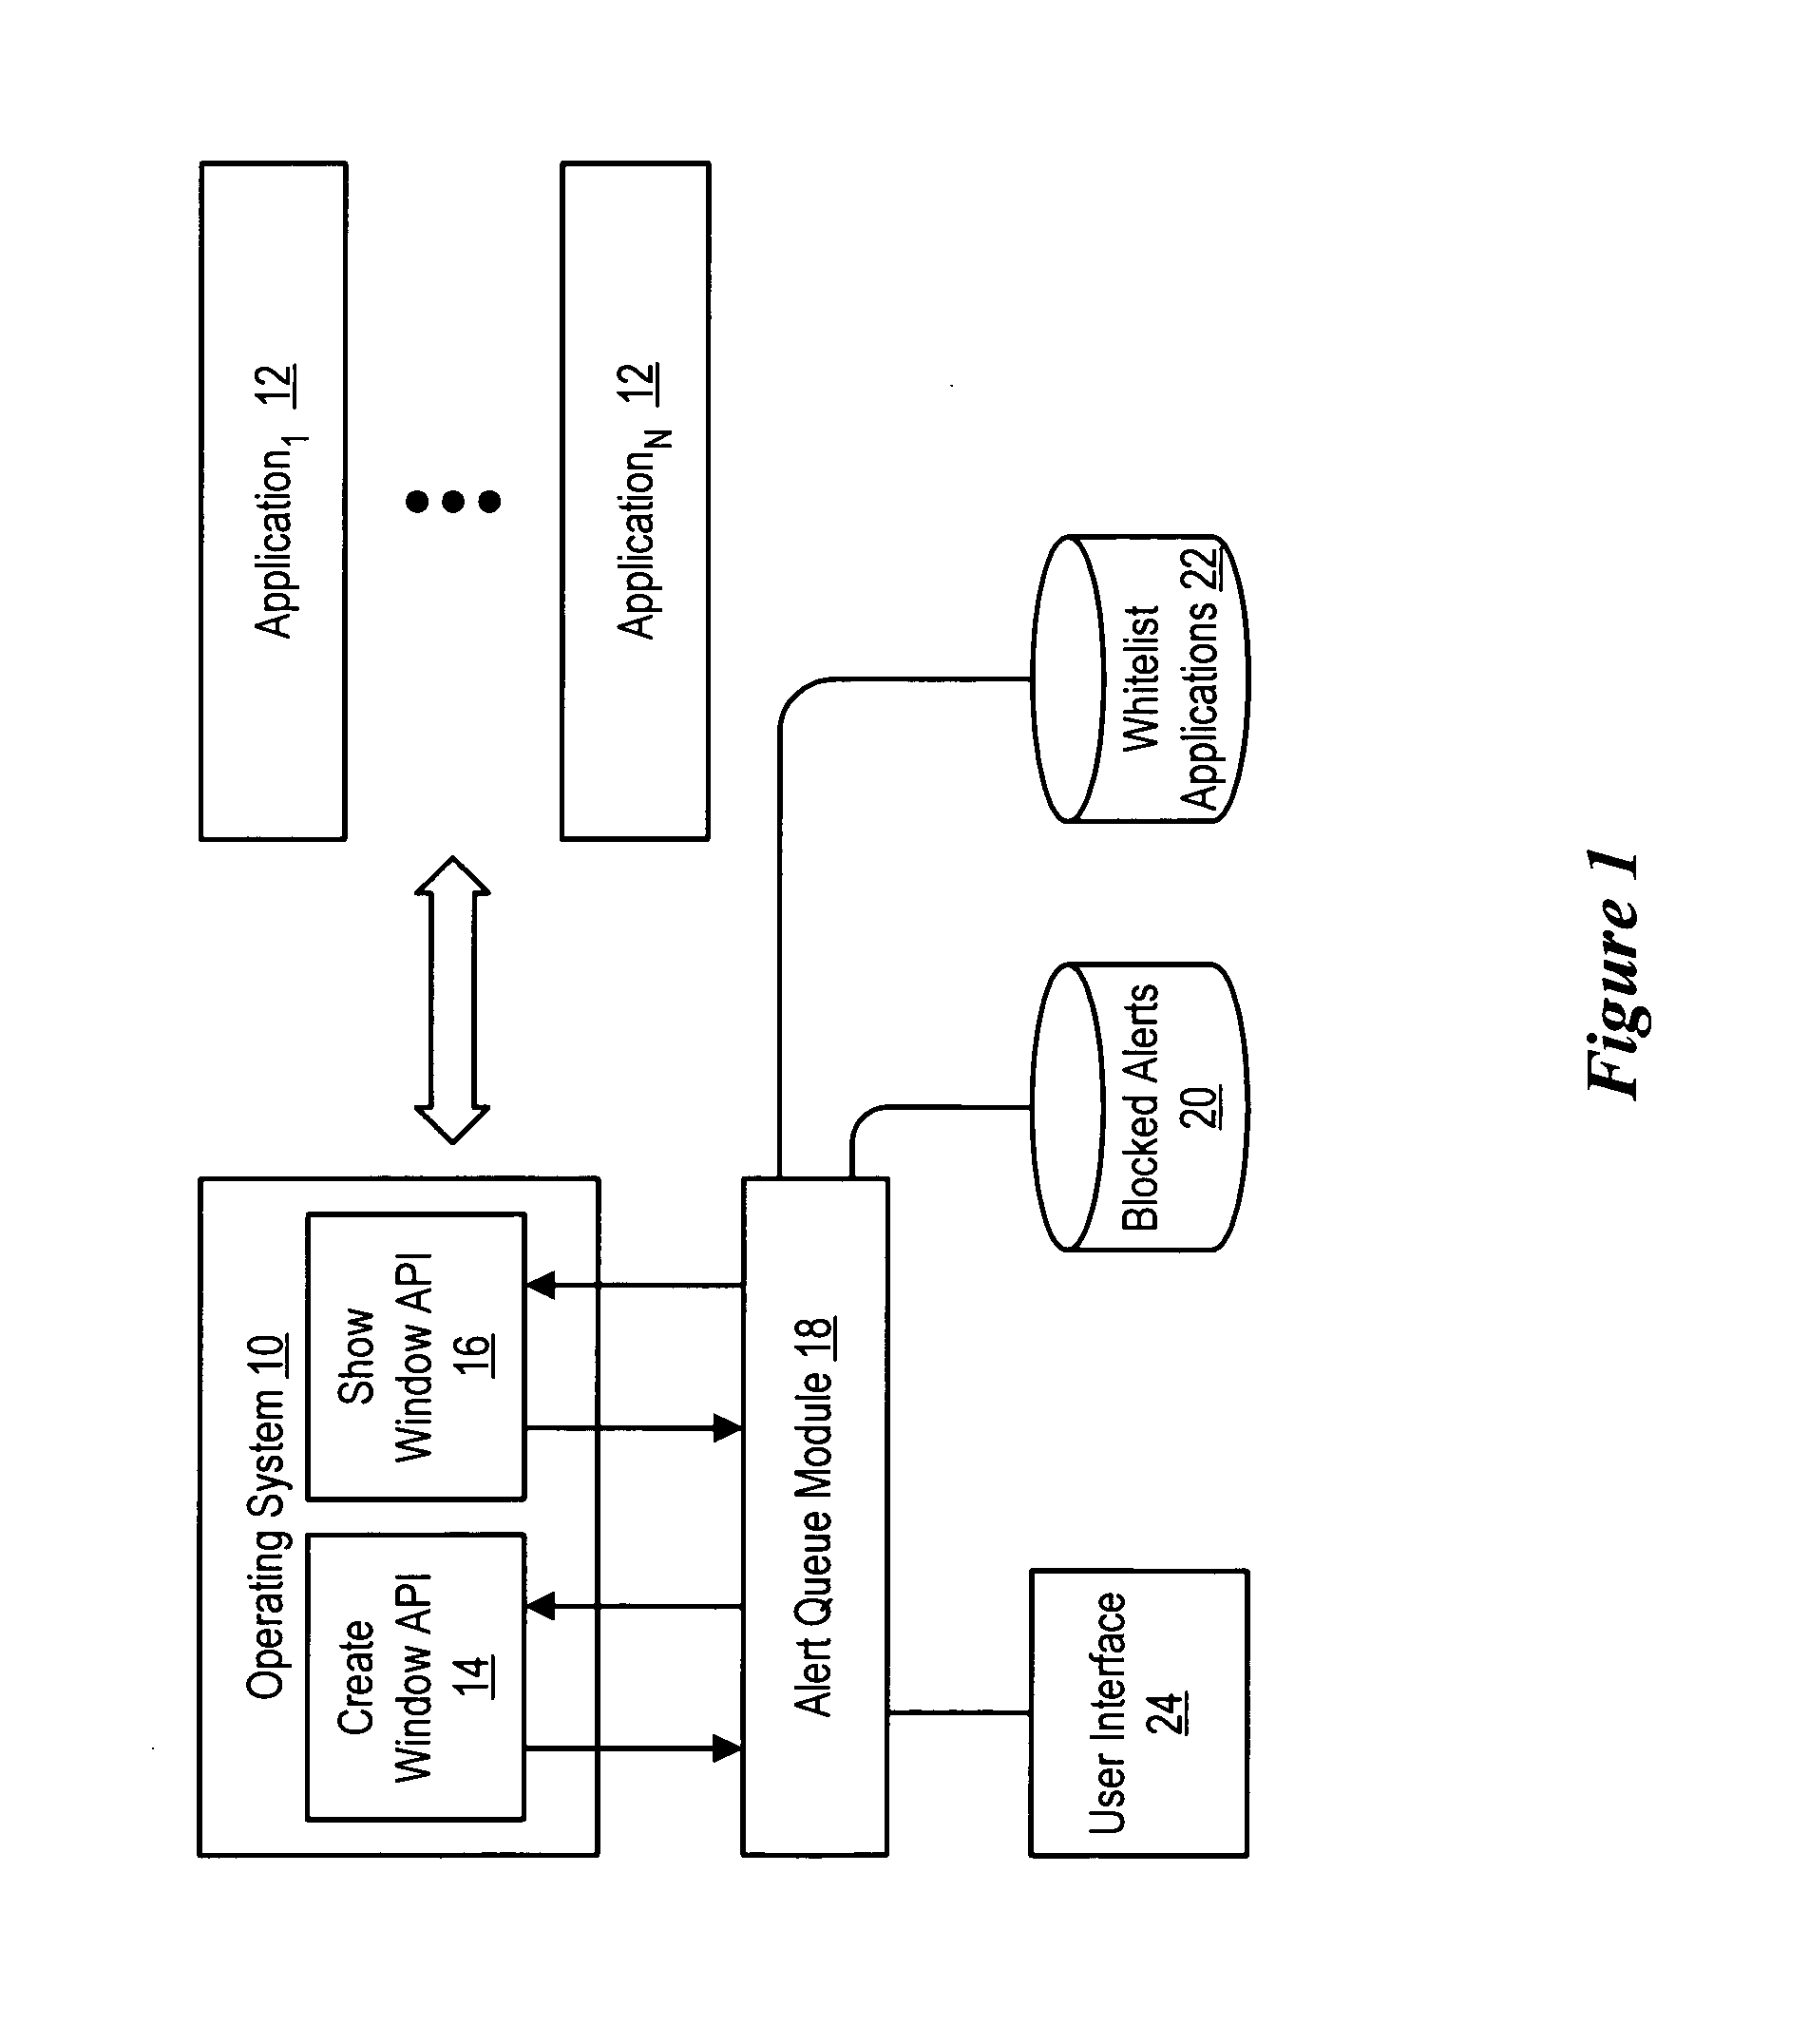 System and method for managing application alerts